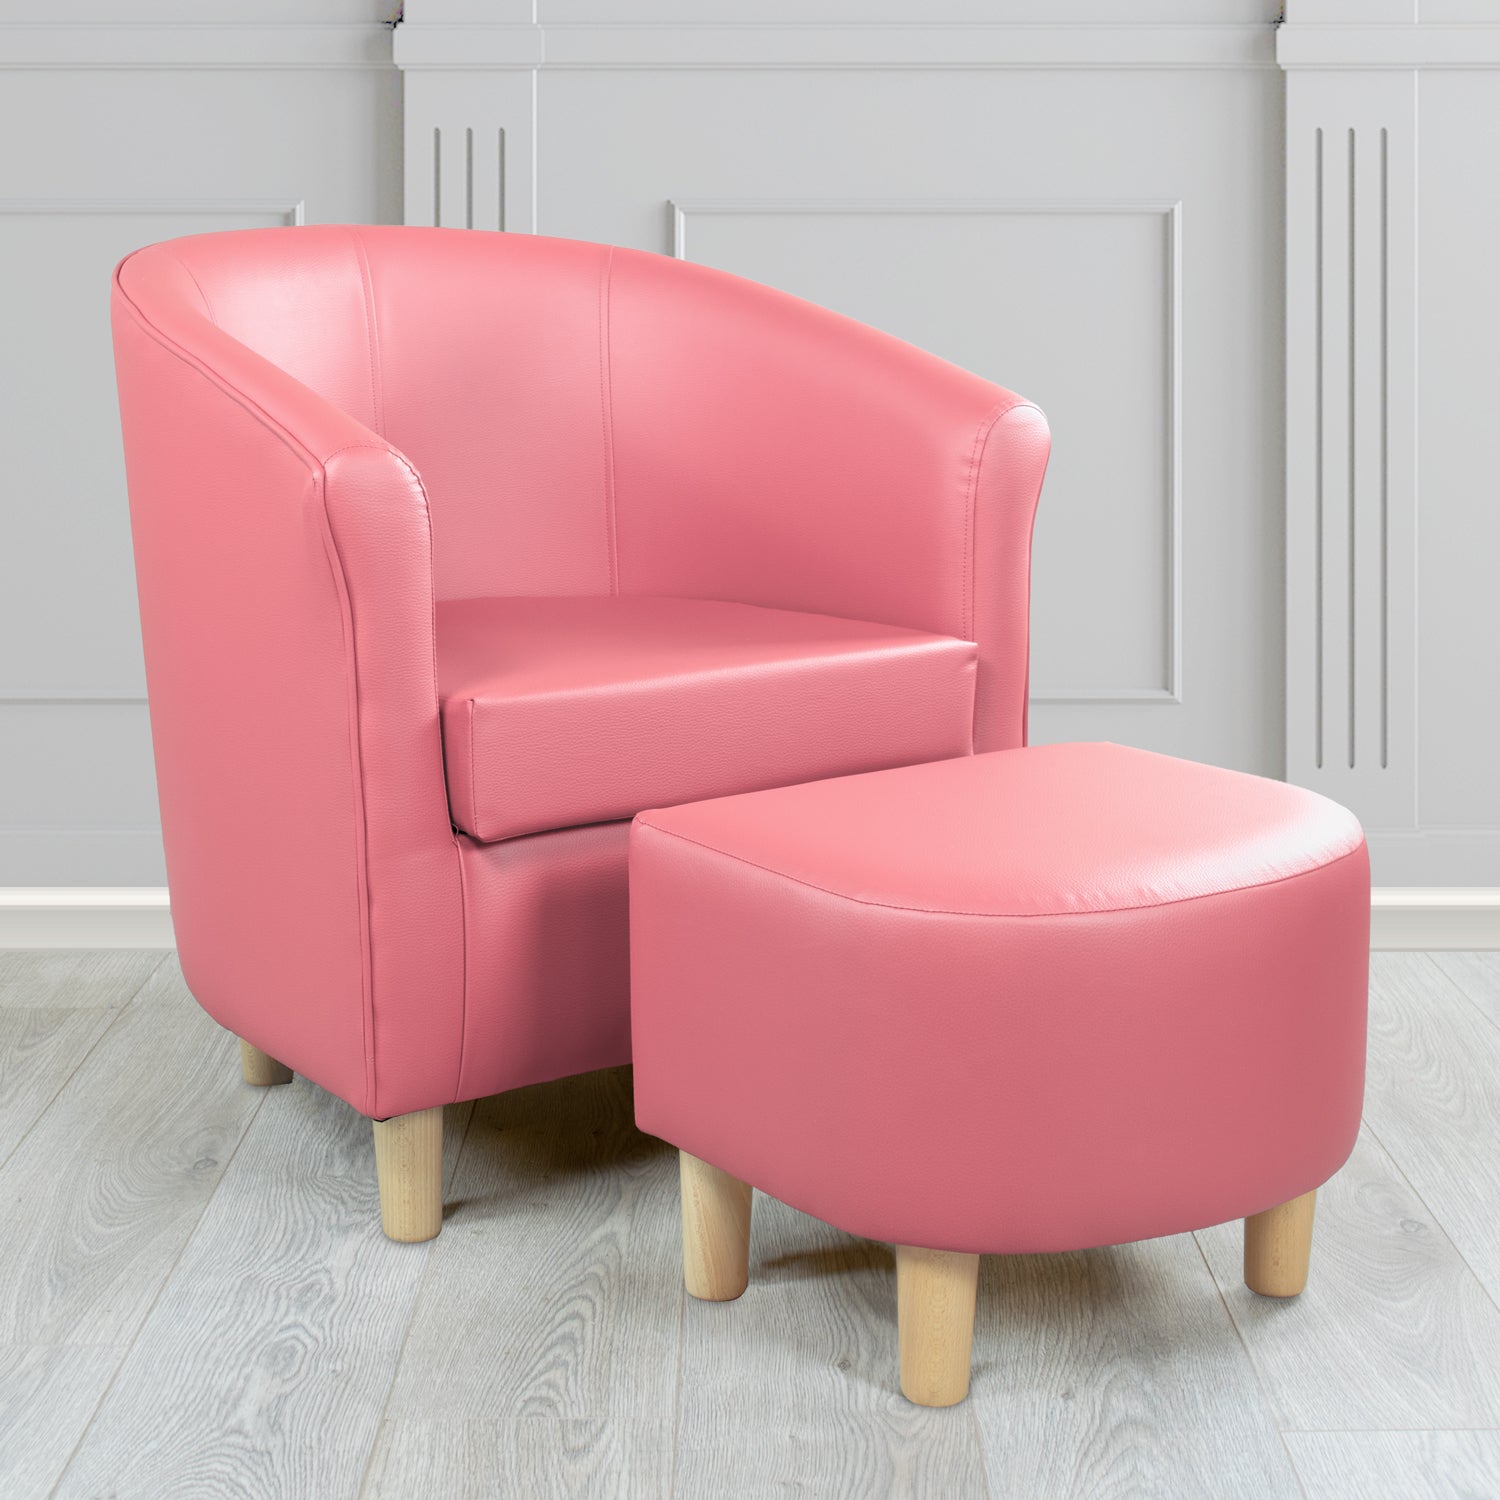 Express Tuscany Pink DR Faux Leather Tub Chair with Footstool Set (6541304725546)